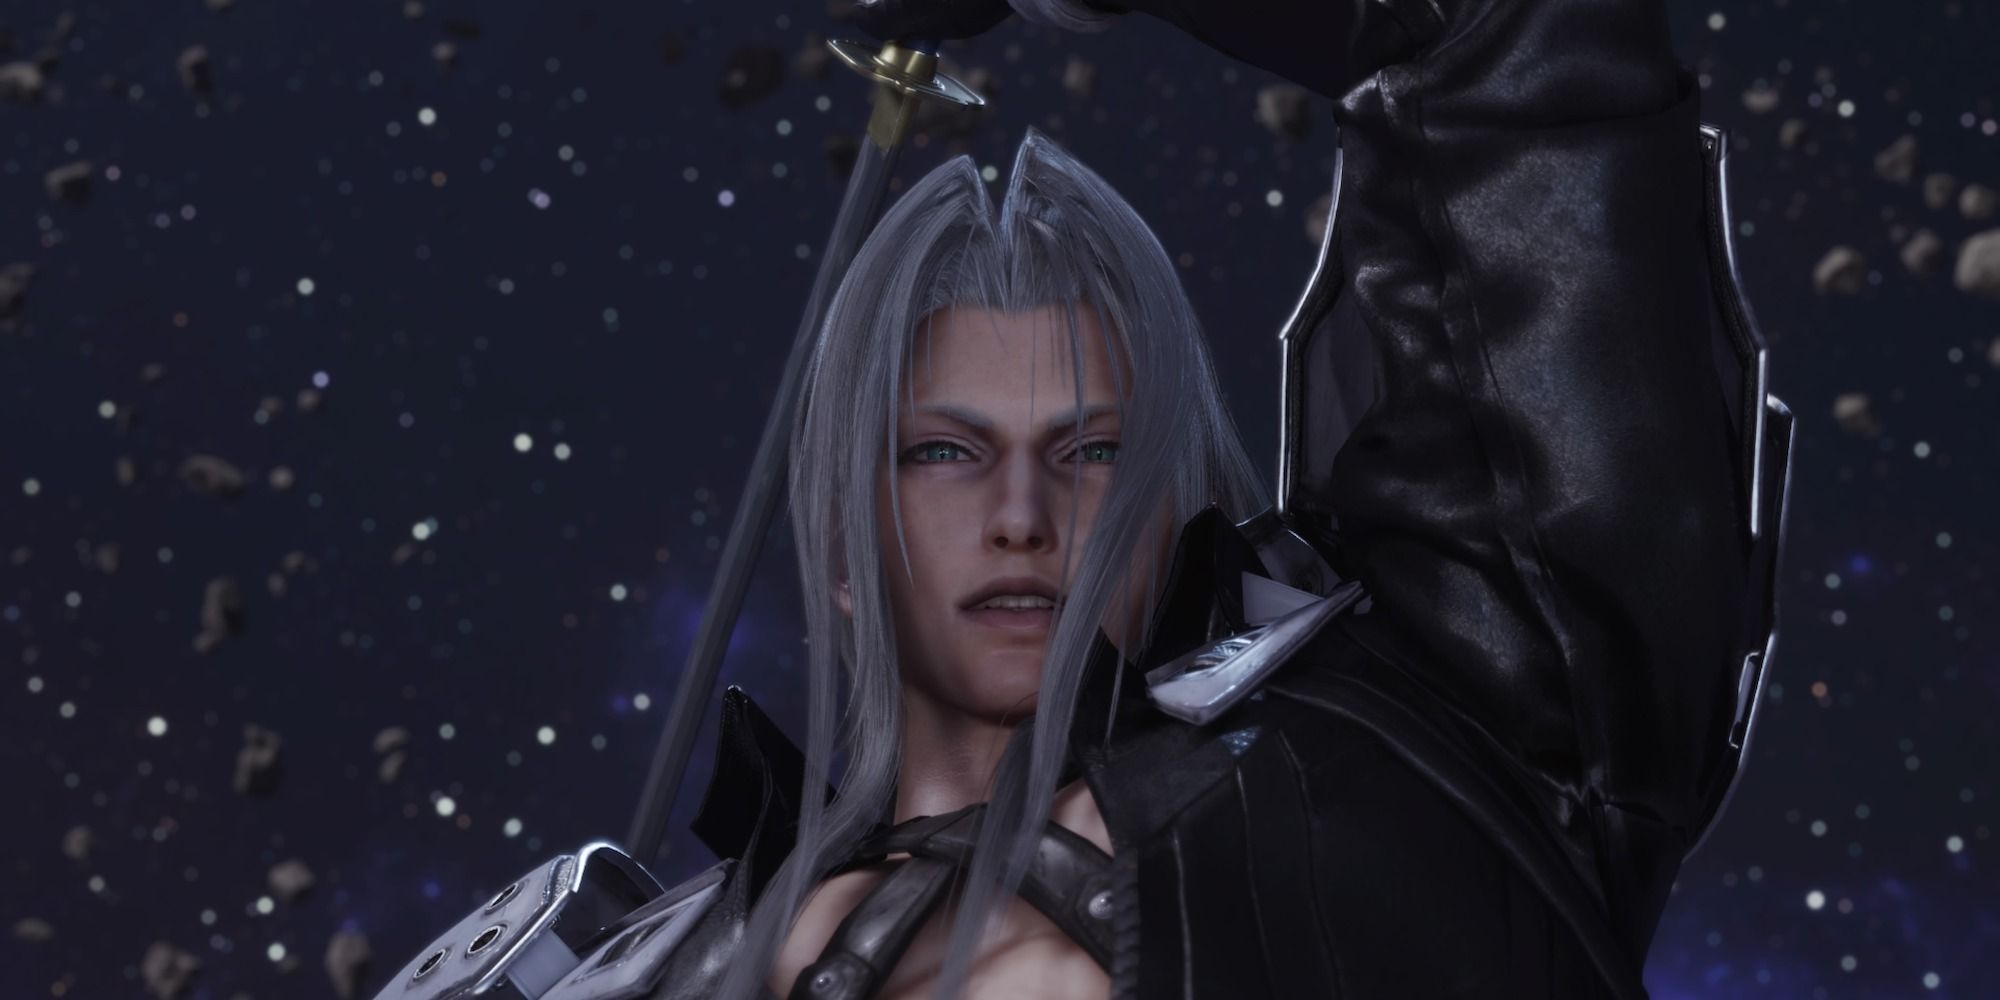 Sephiroth holding the sword behind his back